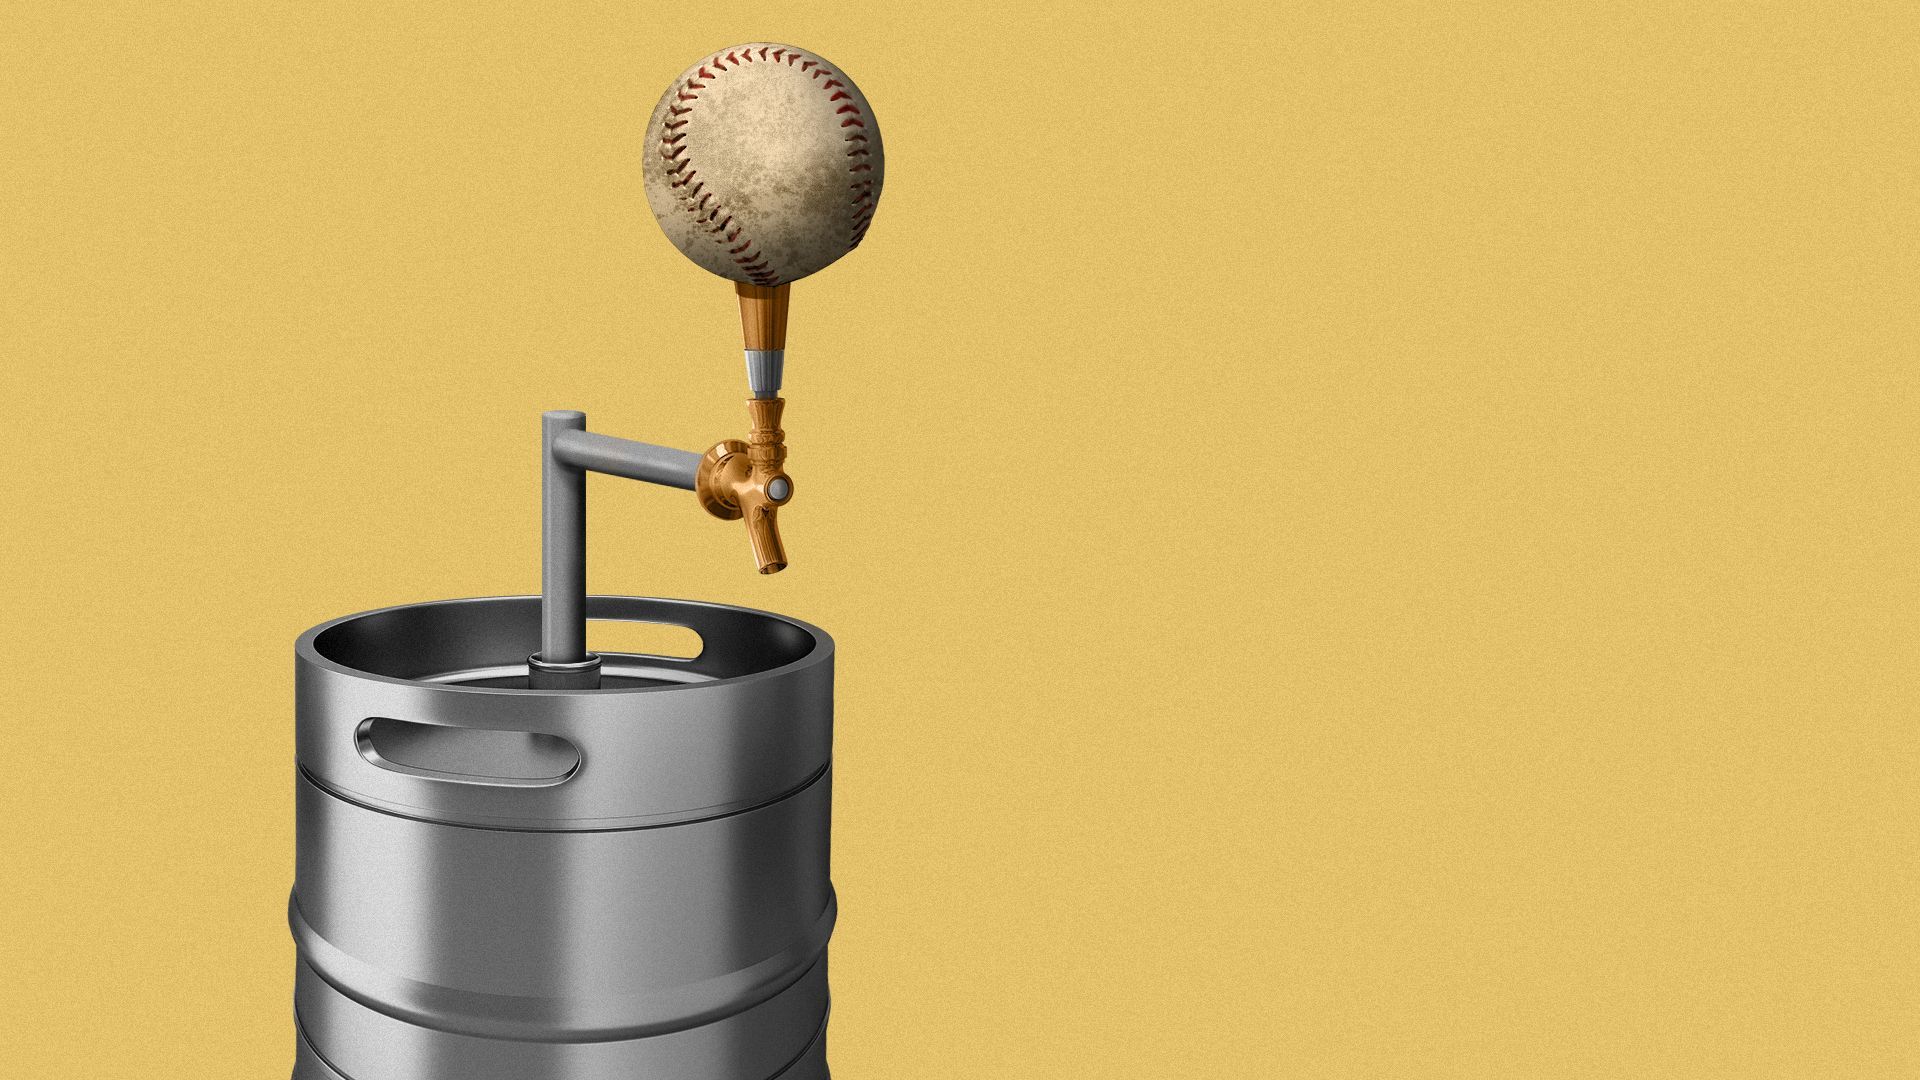 Illustration of a beer keg with a softball tap